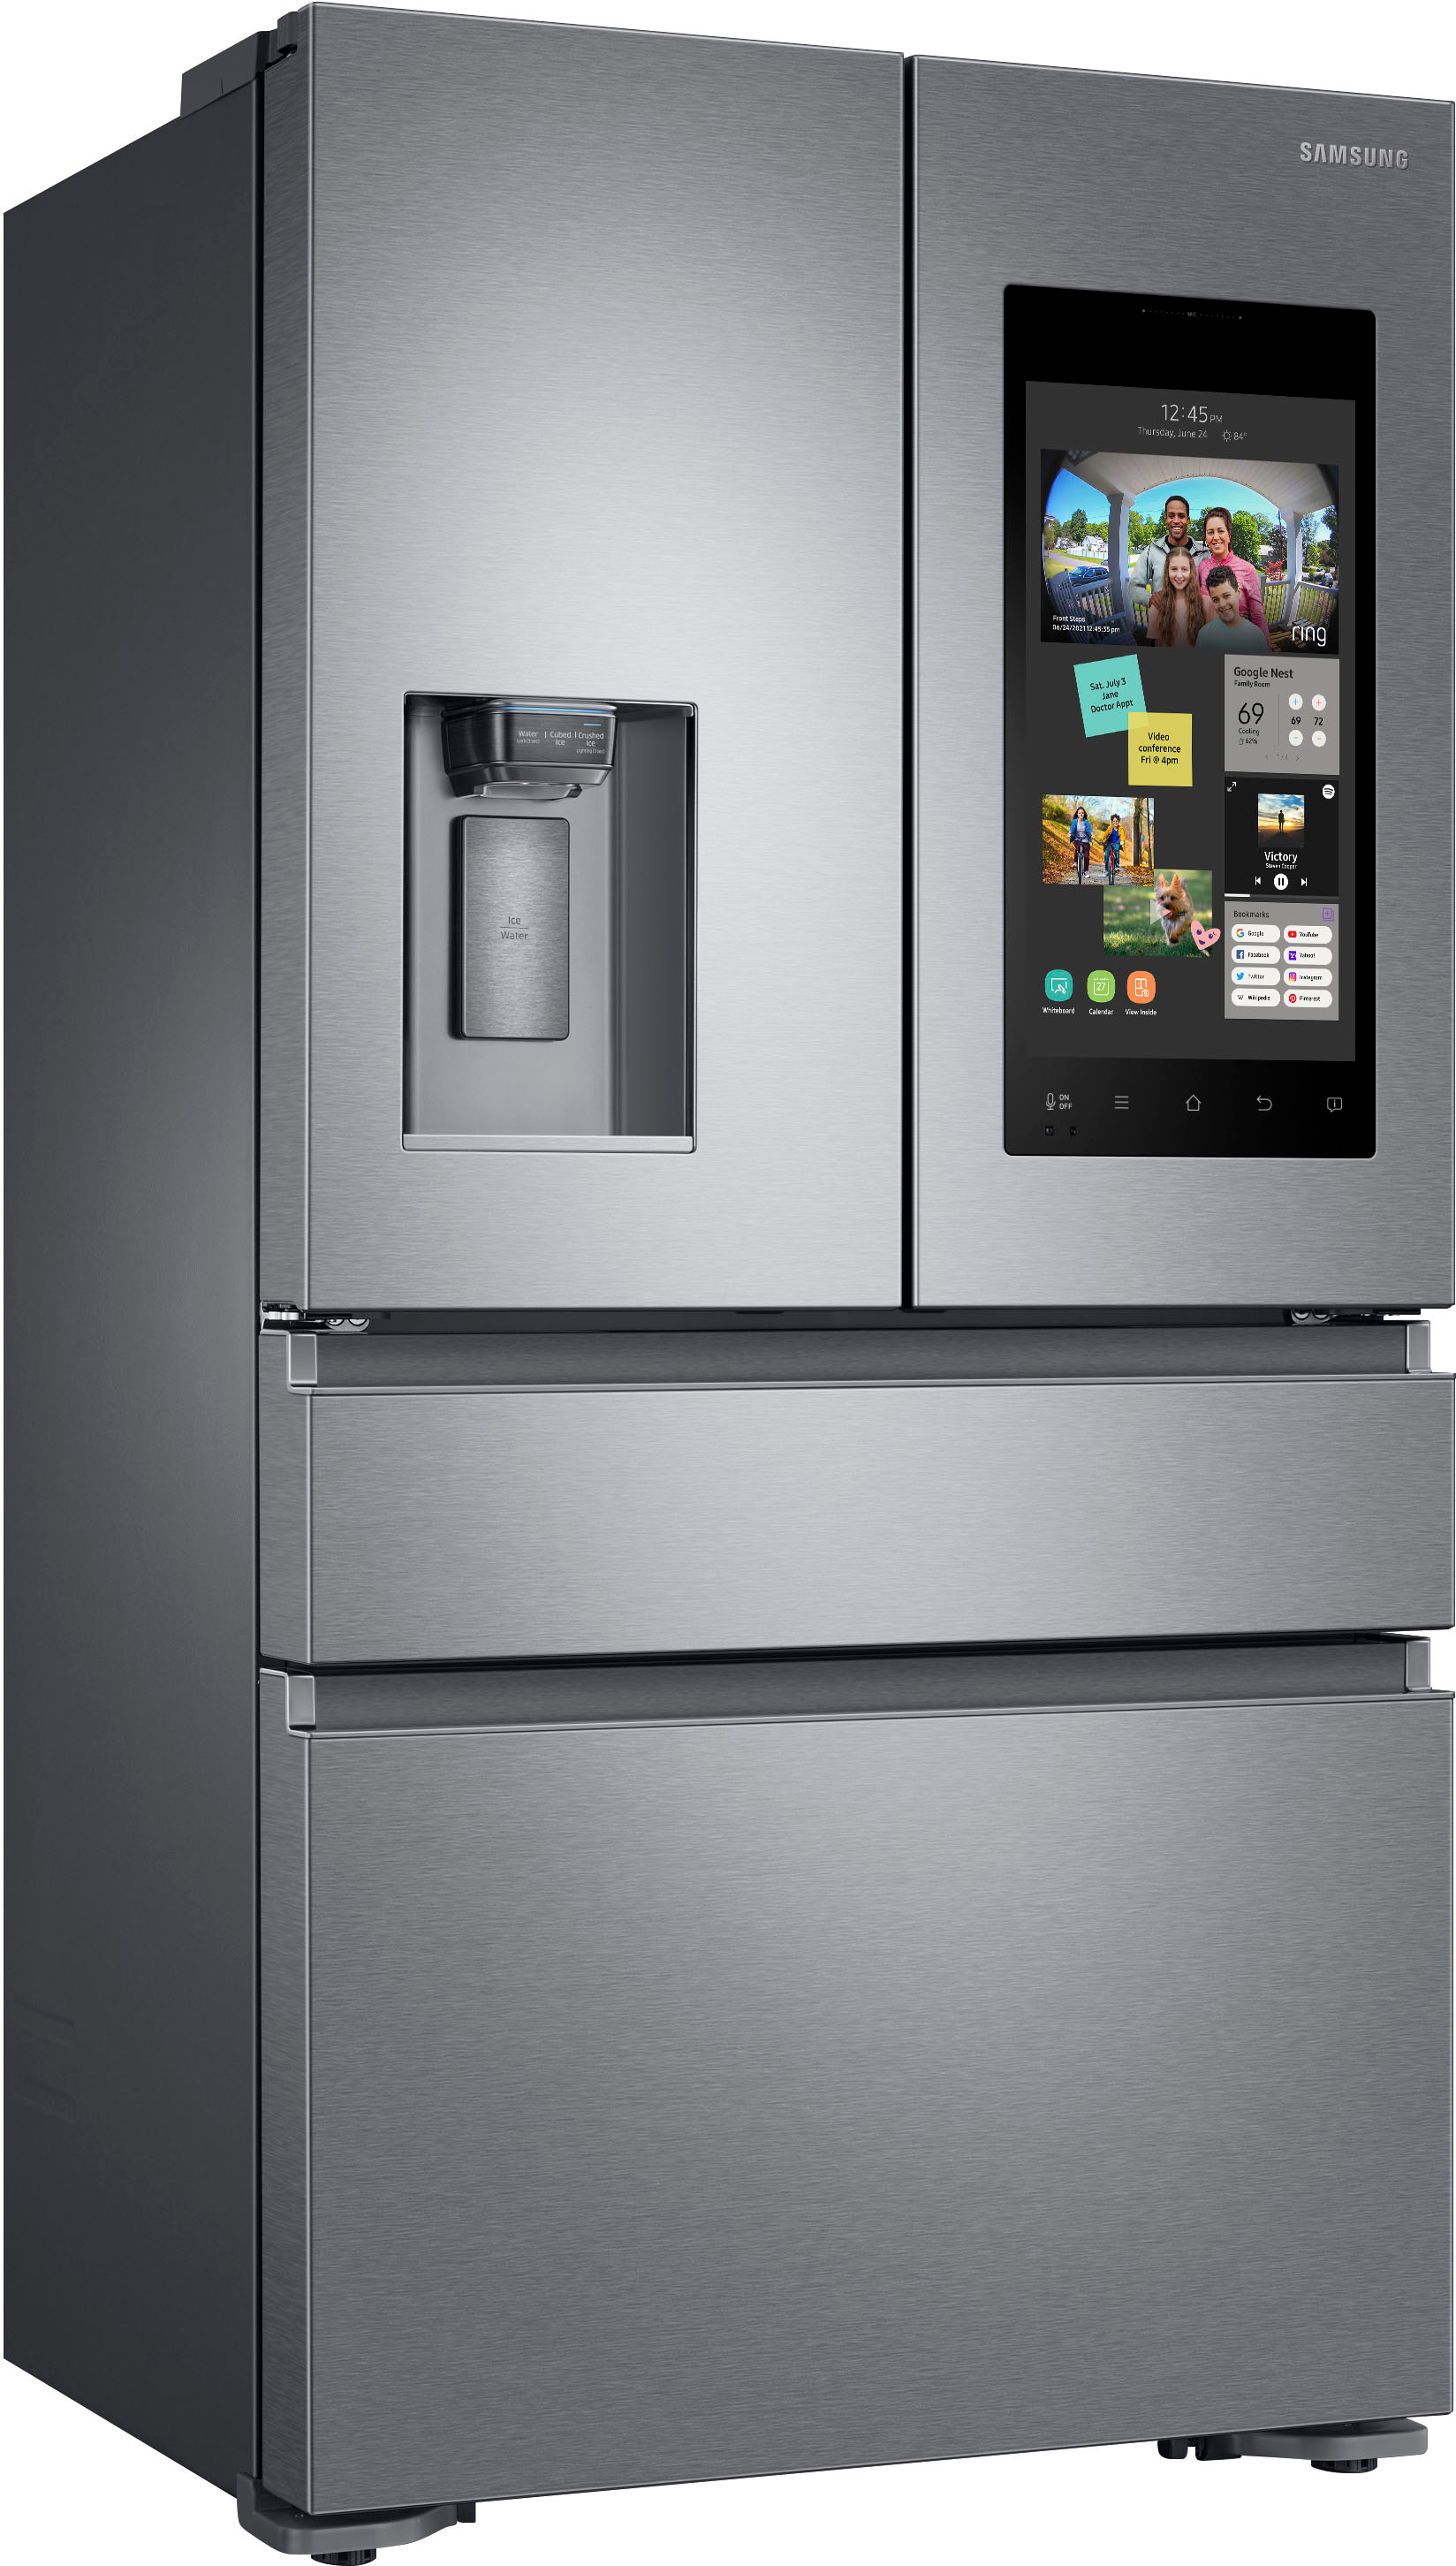 Angle View: Samsung - 17.5 Cu. Ft. French Door Counter-Depth Refrigerator - Stainless steel